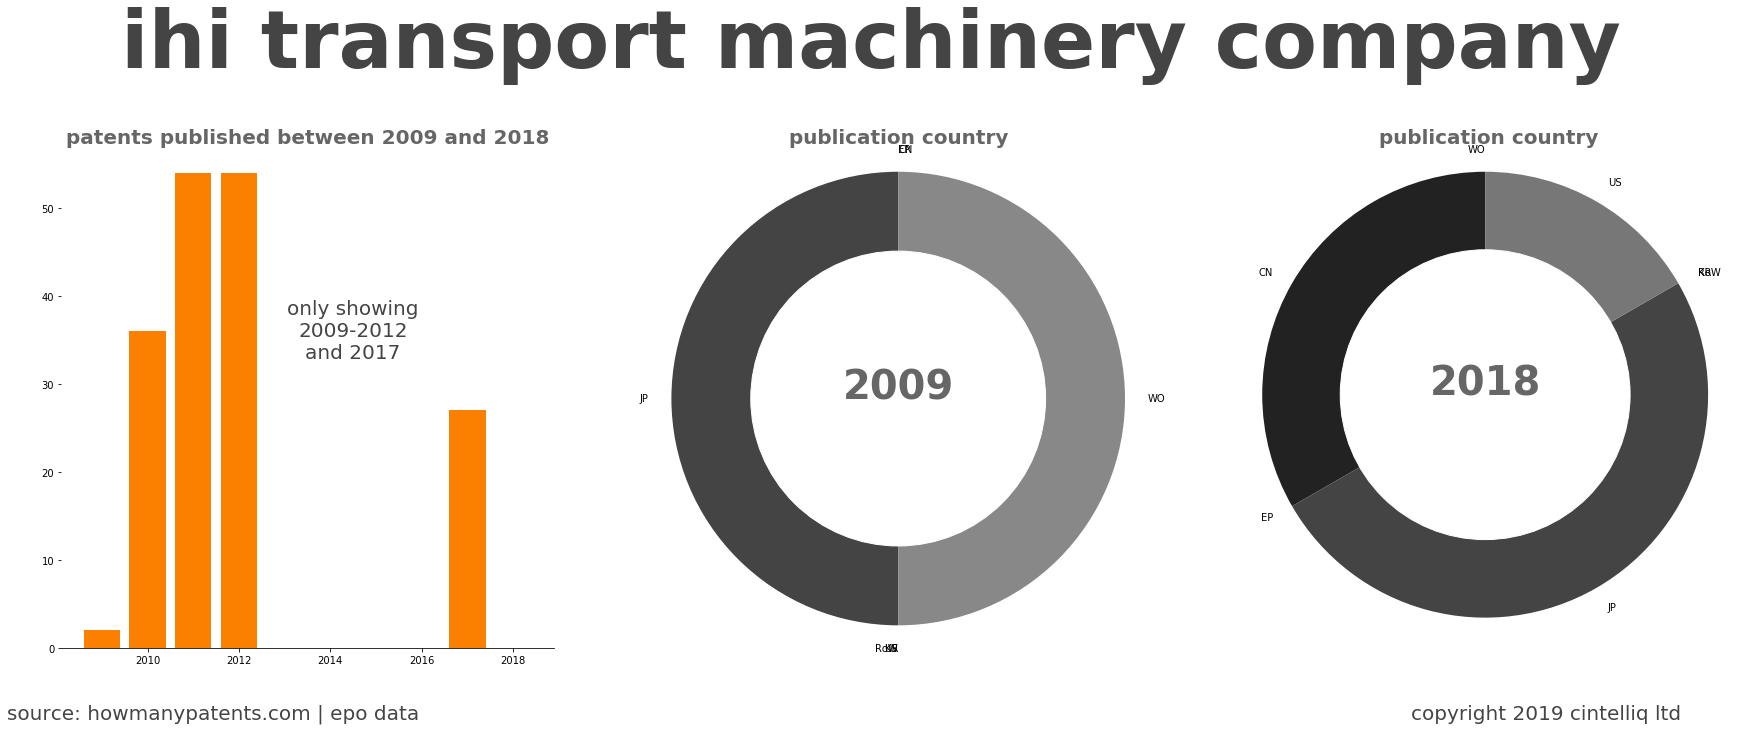 summary of patents for Ihi Transport Machinery Company